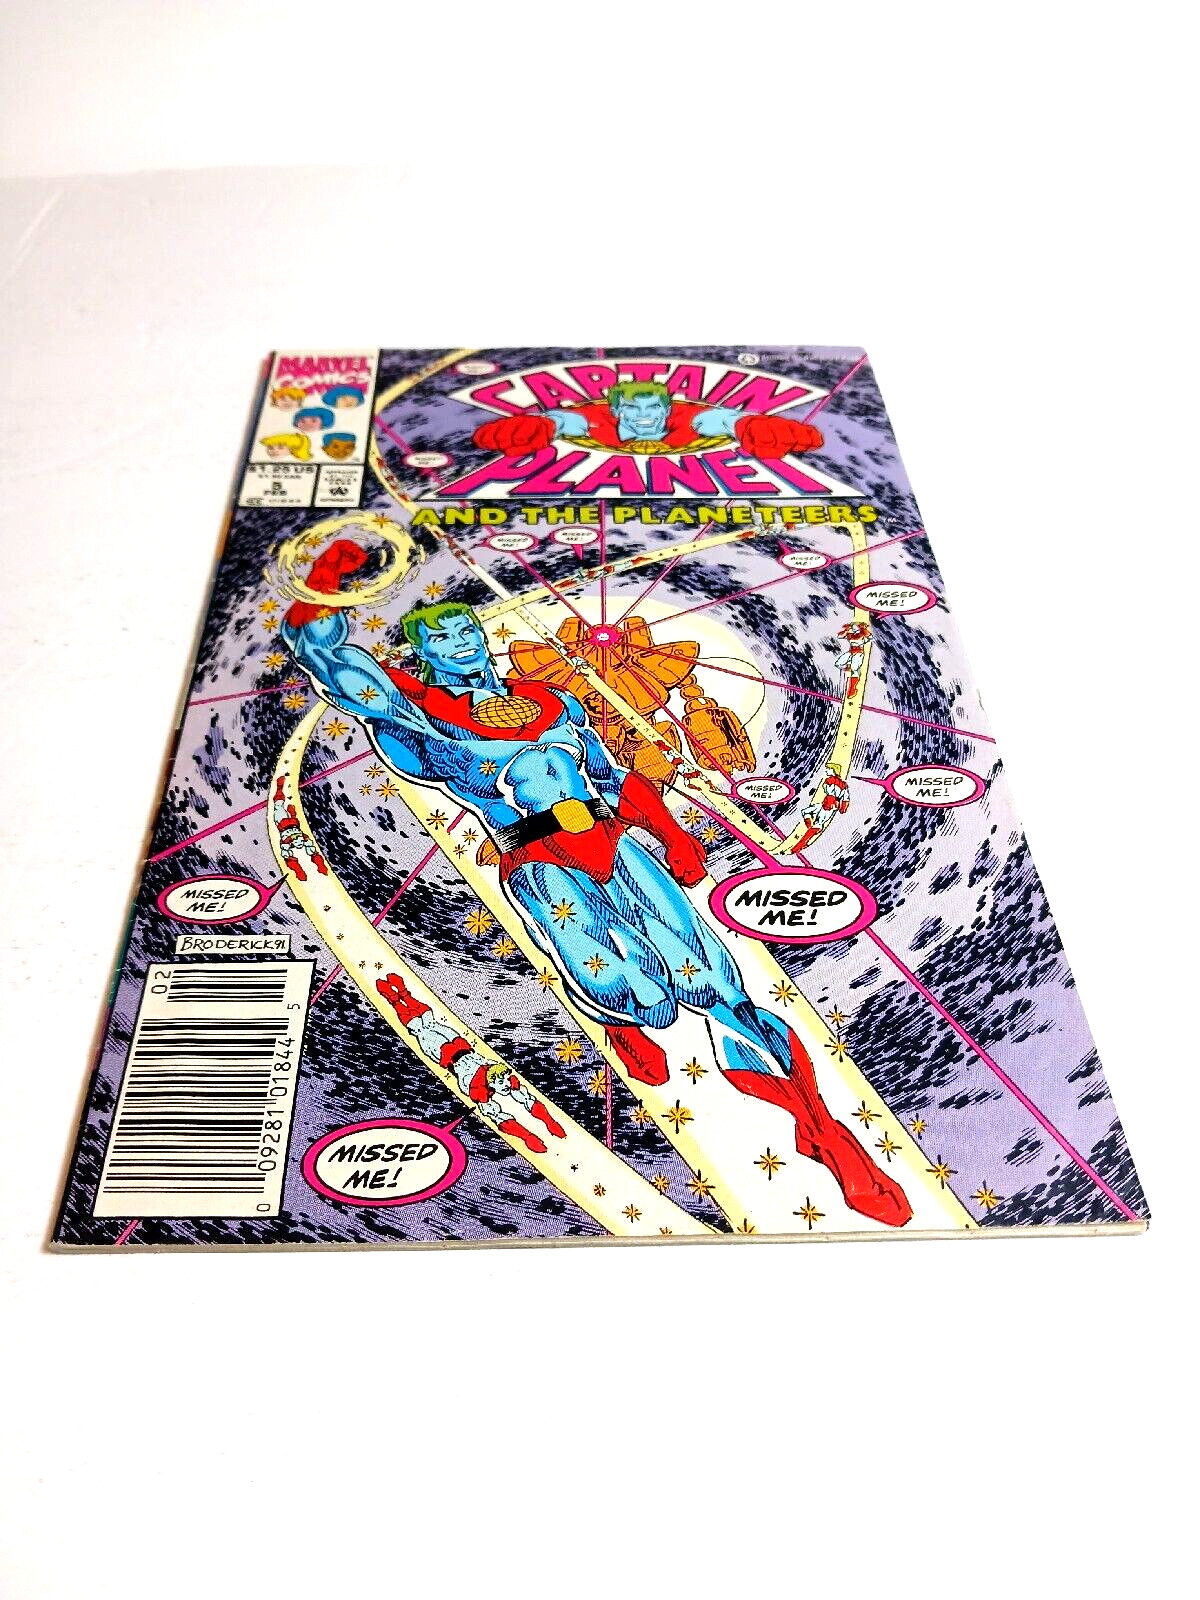 1992 Marvel Comics Captain Planet And The Planeteers #5 Comic Book Bag Boarded